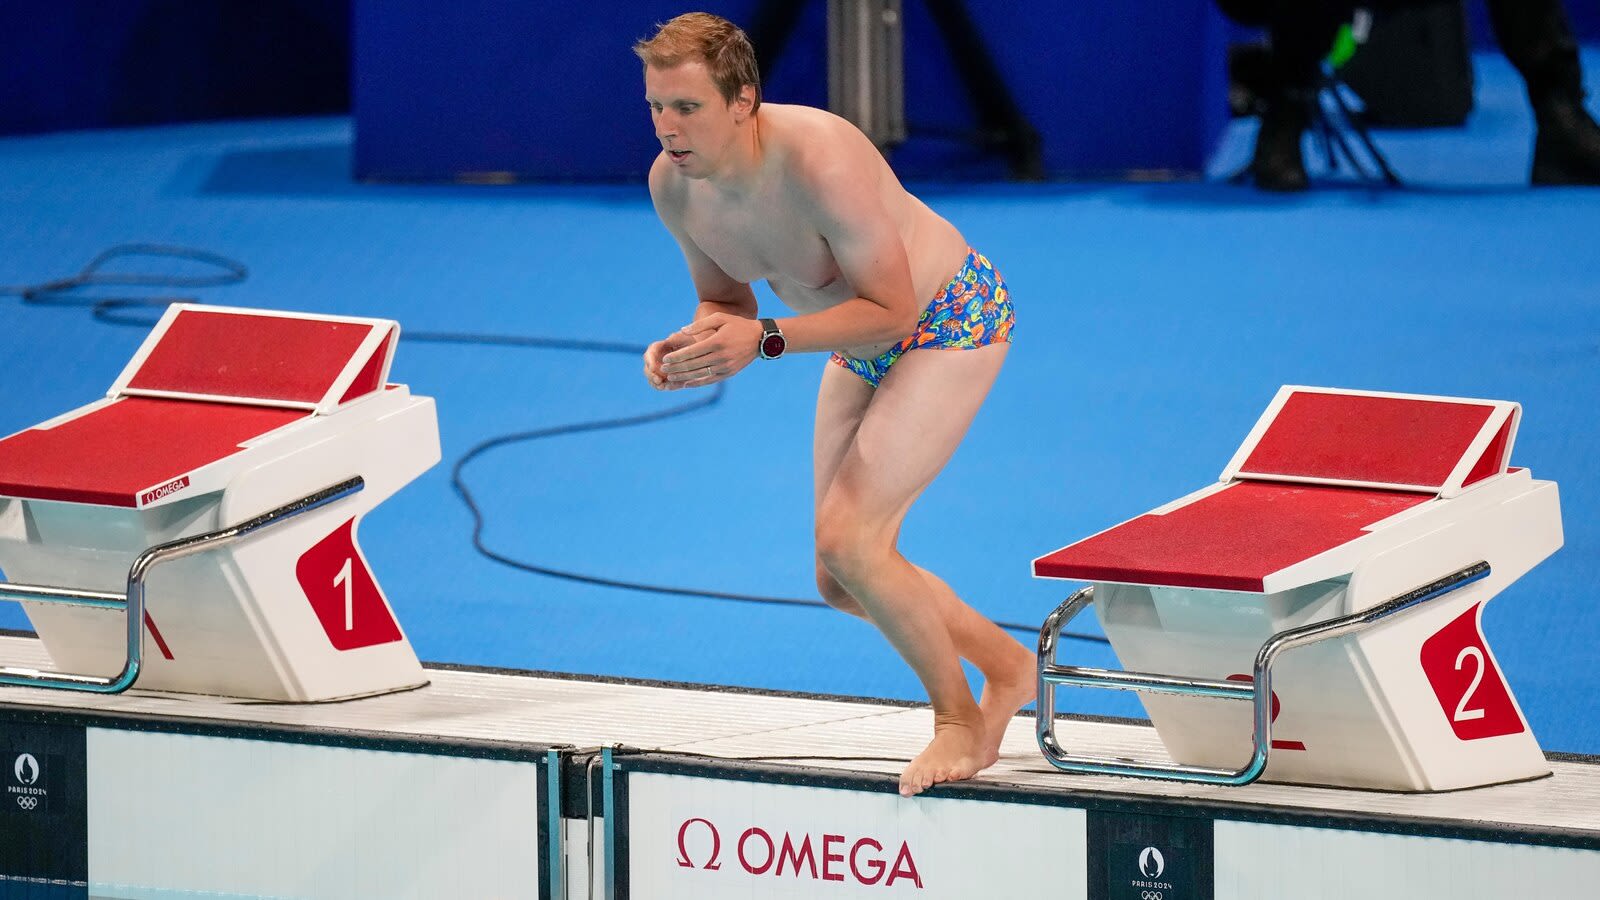 Pool worker strips to his briefs to retrieve a lost swim cap, drawing whistles from fans